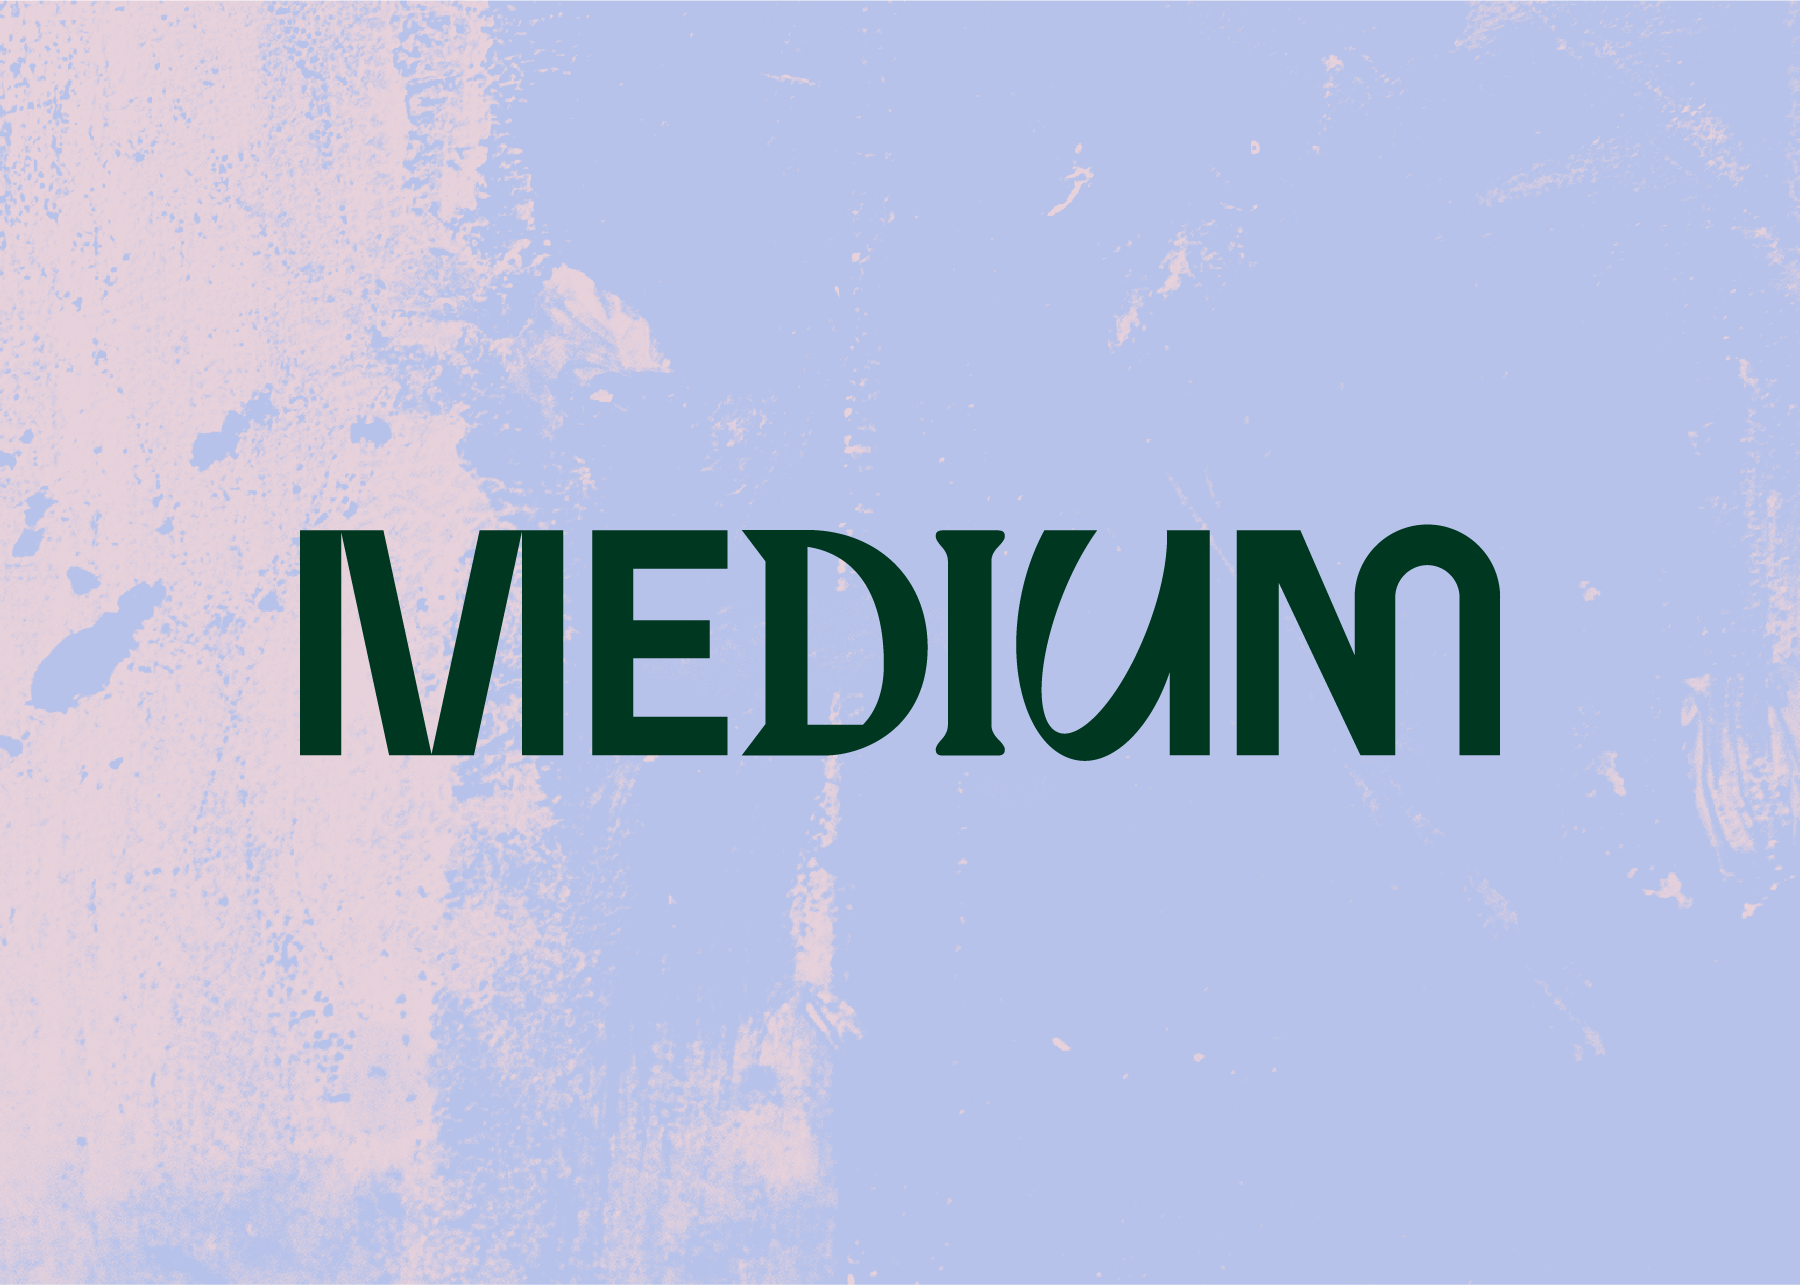 CACHE Introduces The Medium, a New Name for its Springdale Hub